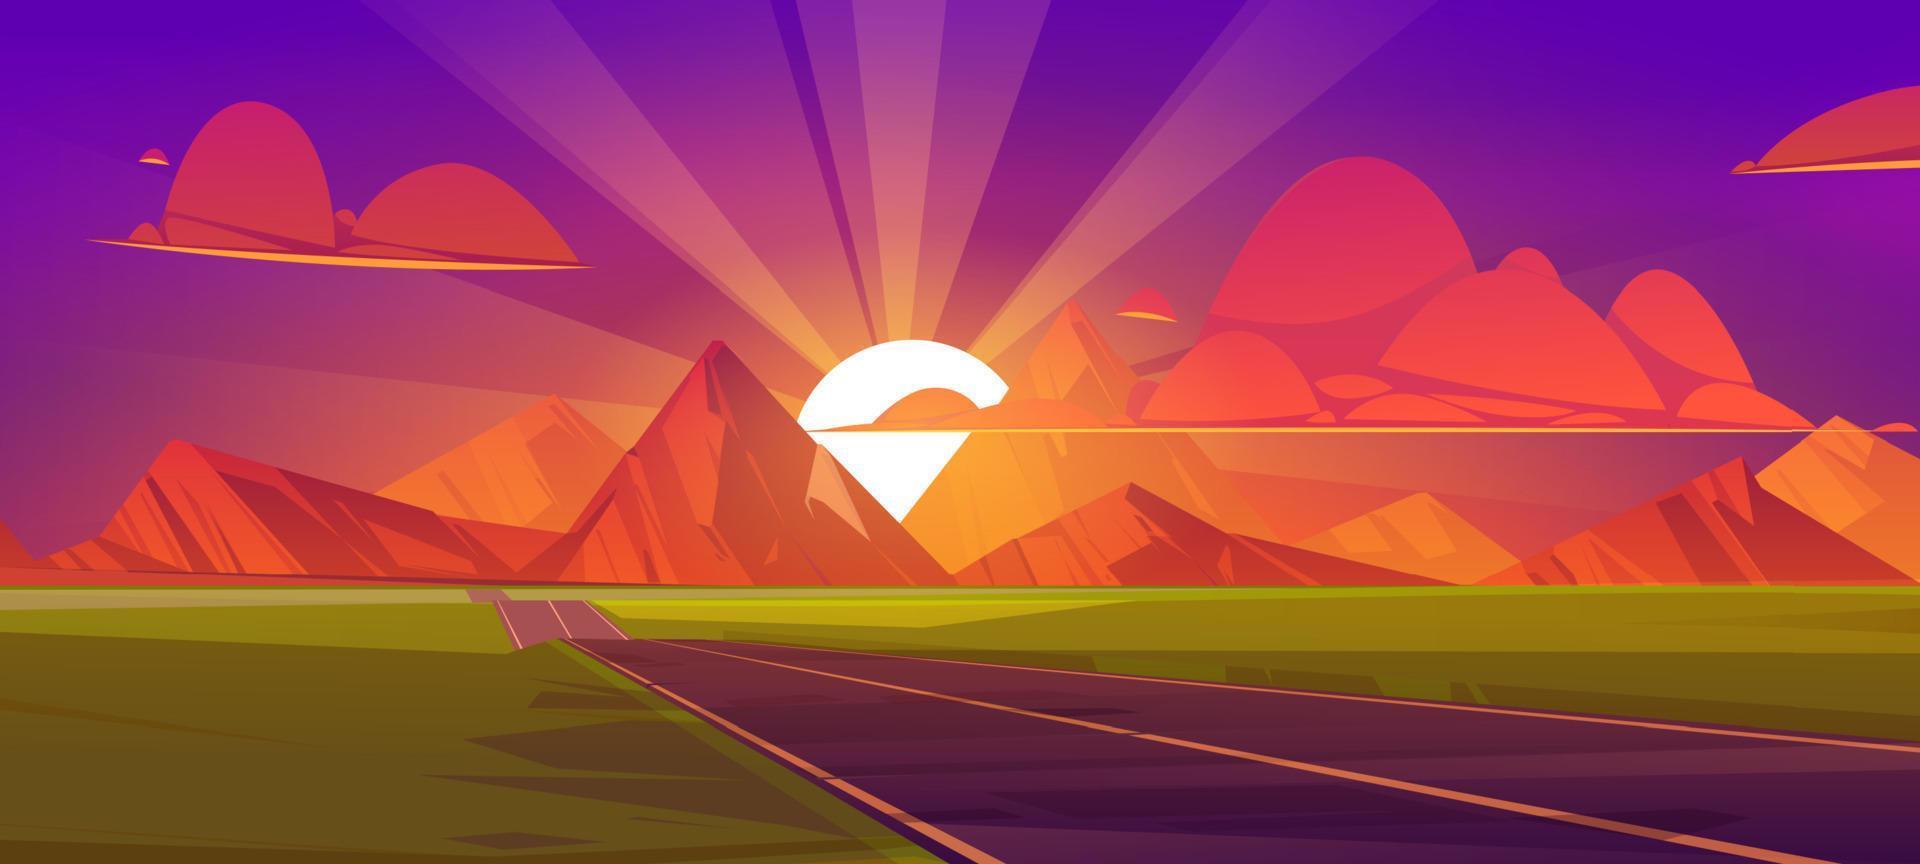 Road at mountains sunset, nature landscape view vector